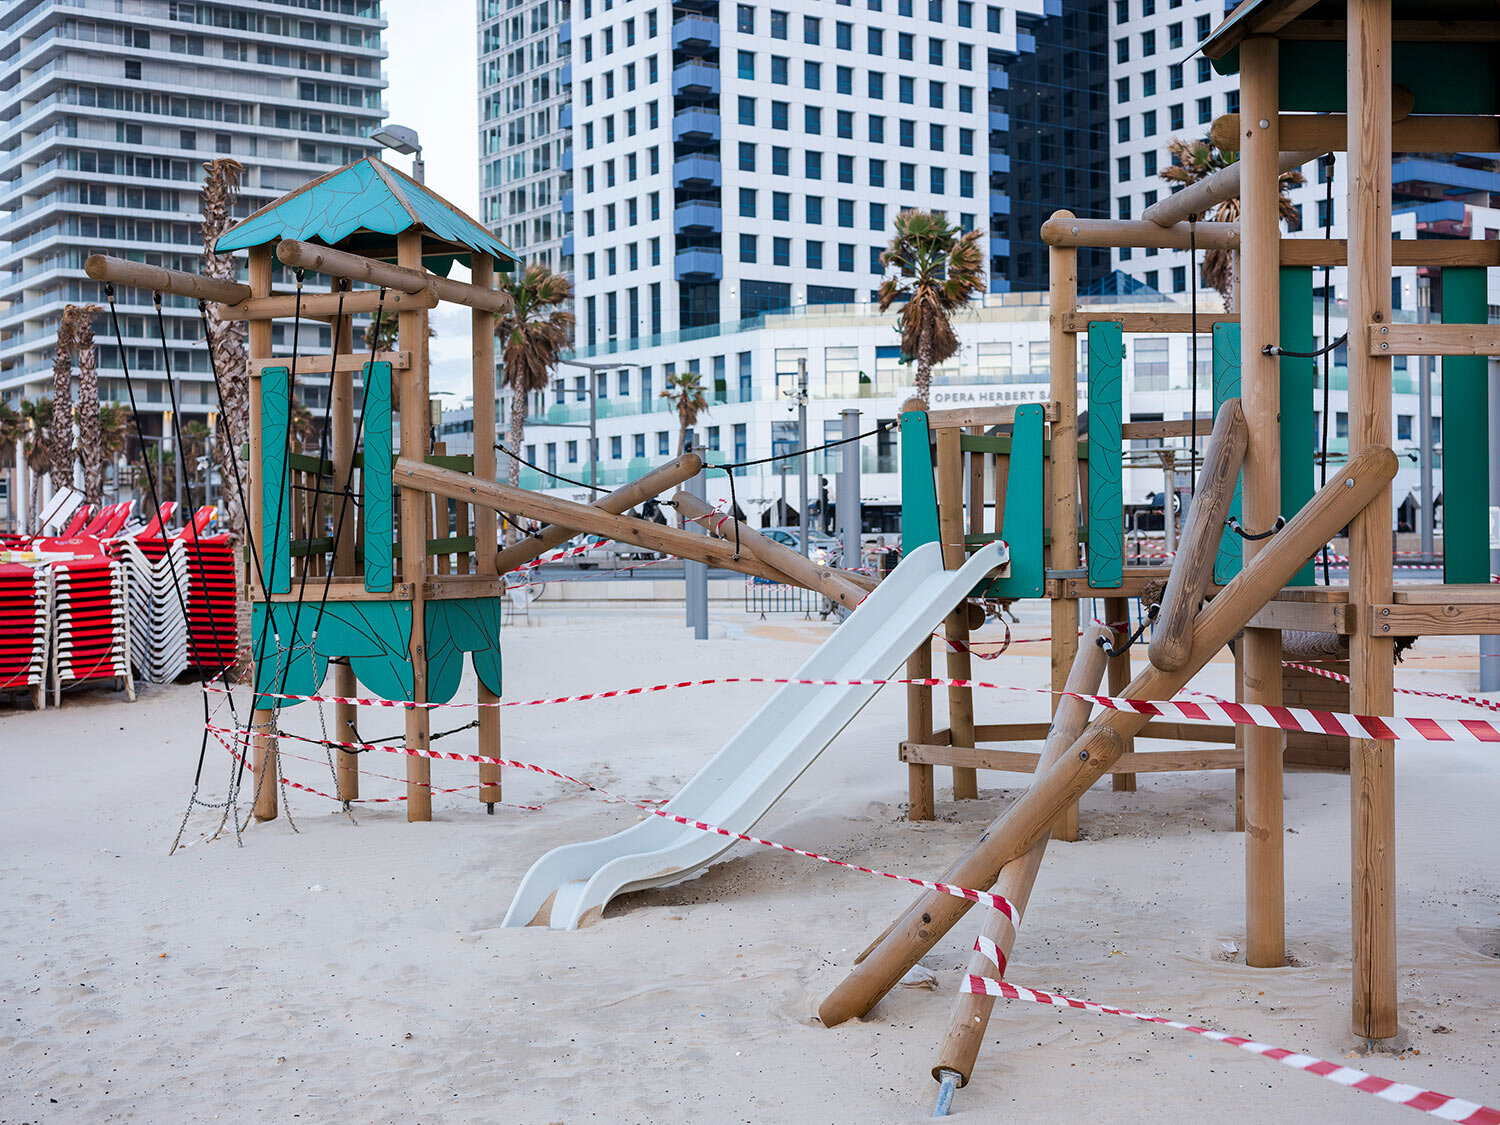  This Thursday, March 19, 2020 photo shows playground at Tel Aviv's beachfront wrapped in tape to prevent public access. (AP Photo/Oded Balilty) 